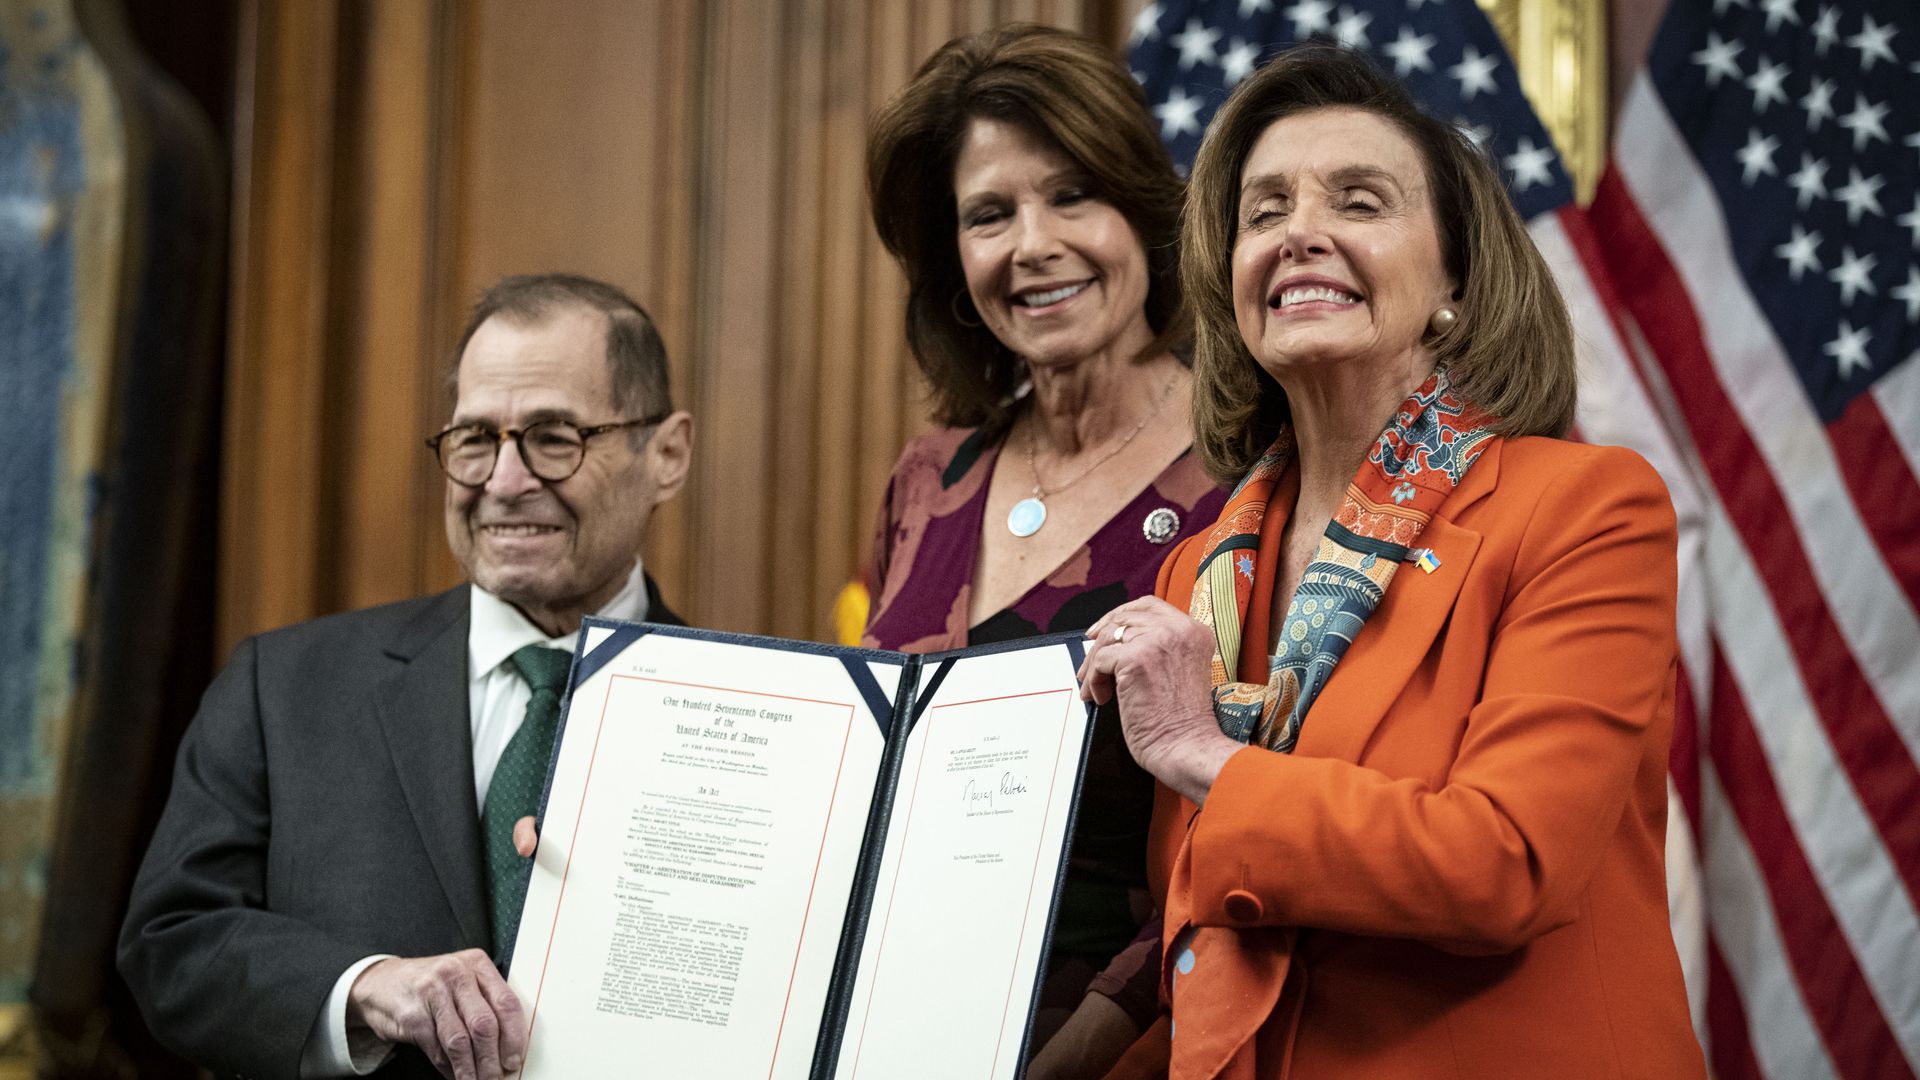 House Speaker Nancy Pelosi is seen smiling with other lawmakers after moving a law banning forced arbitration in sexual harassment cases.